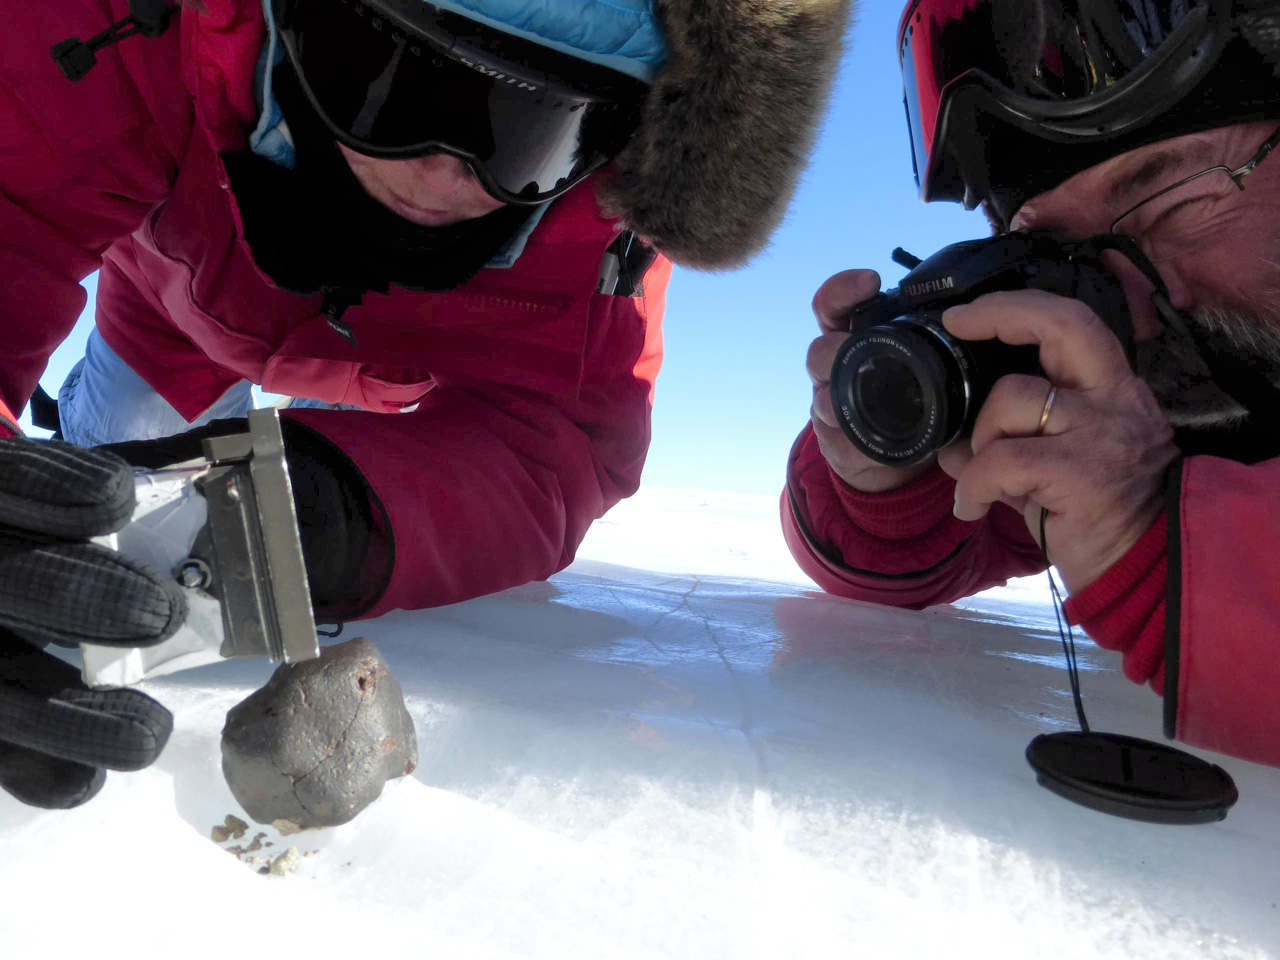 Two scientists examining a meteorite on snow-covered ground.